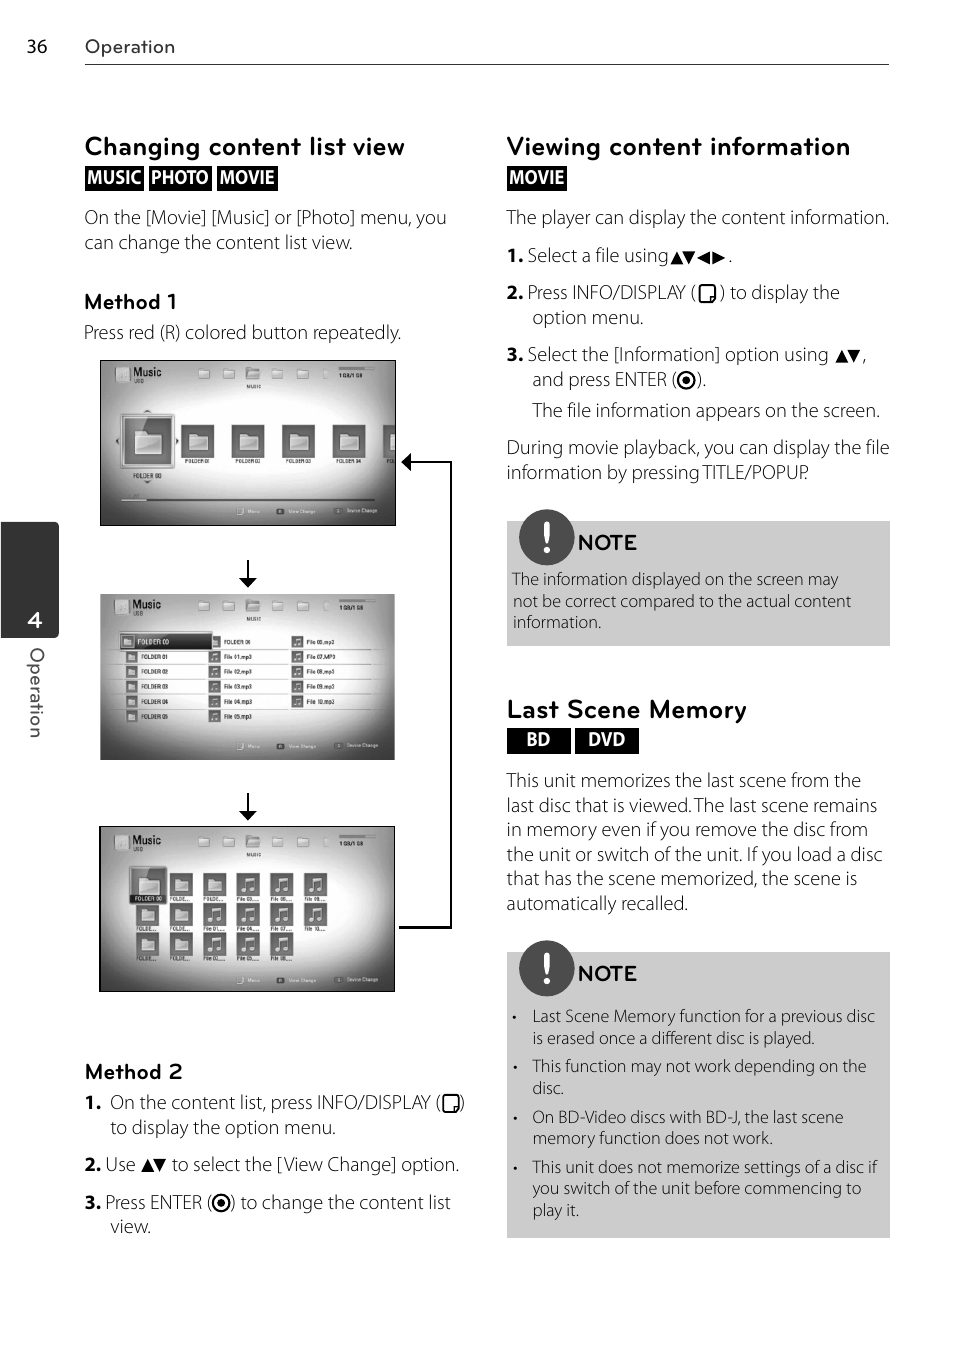 Changing content list view, Viewing content information | LG BD678N User Manual | Page 36 / 72